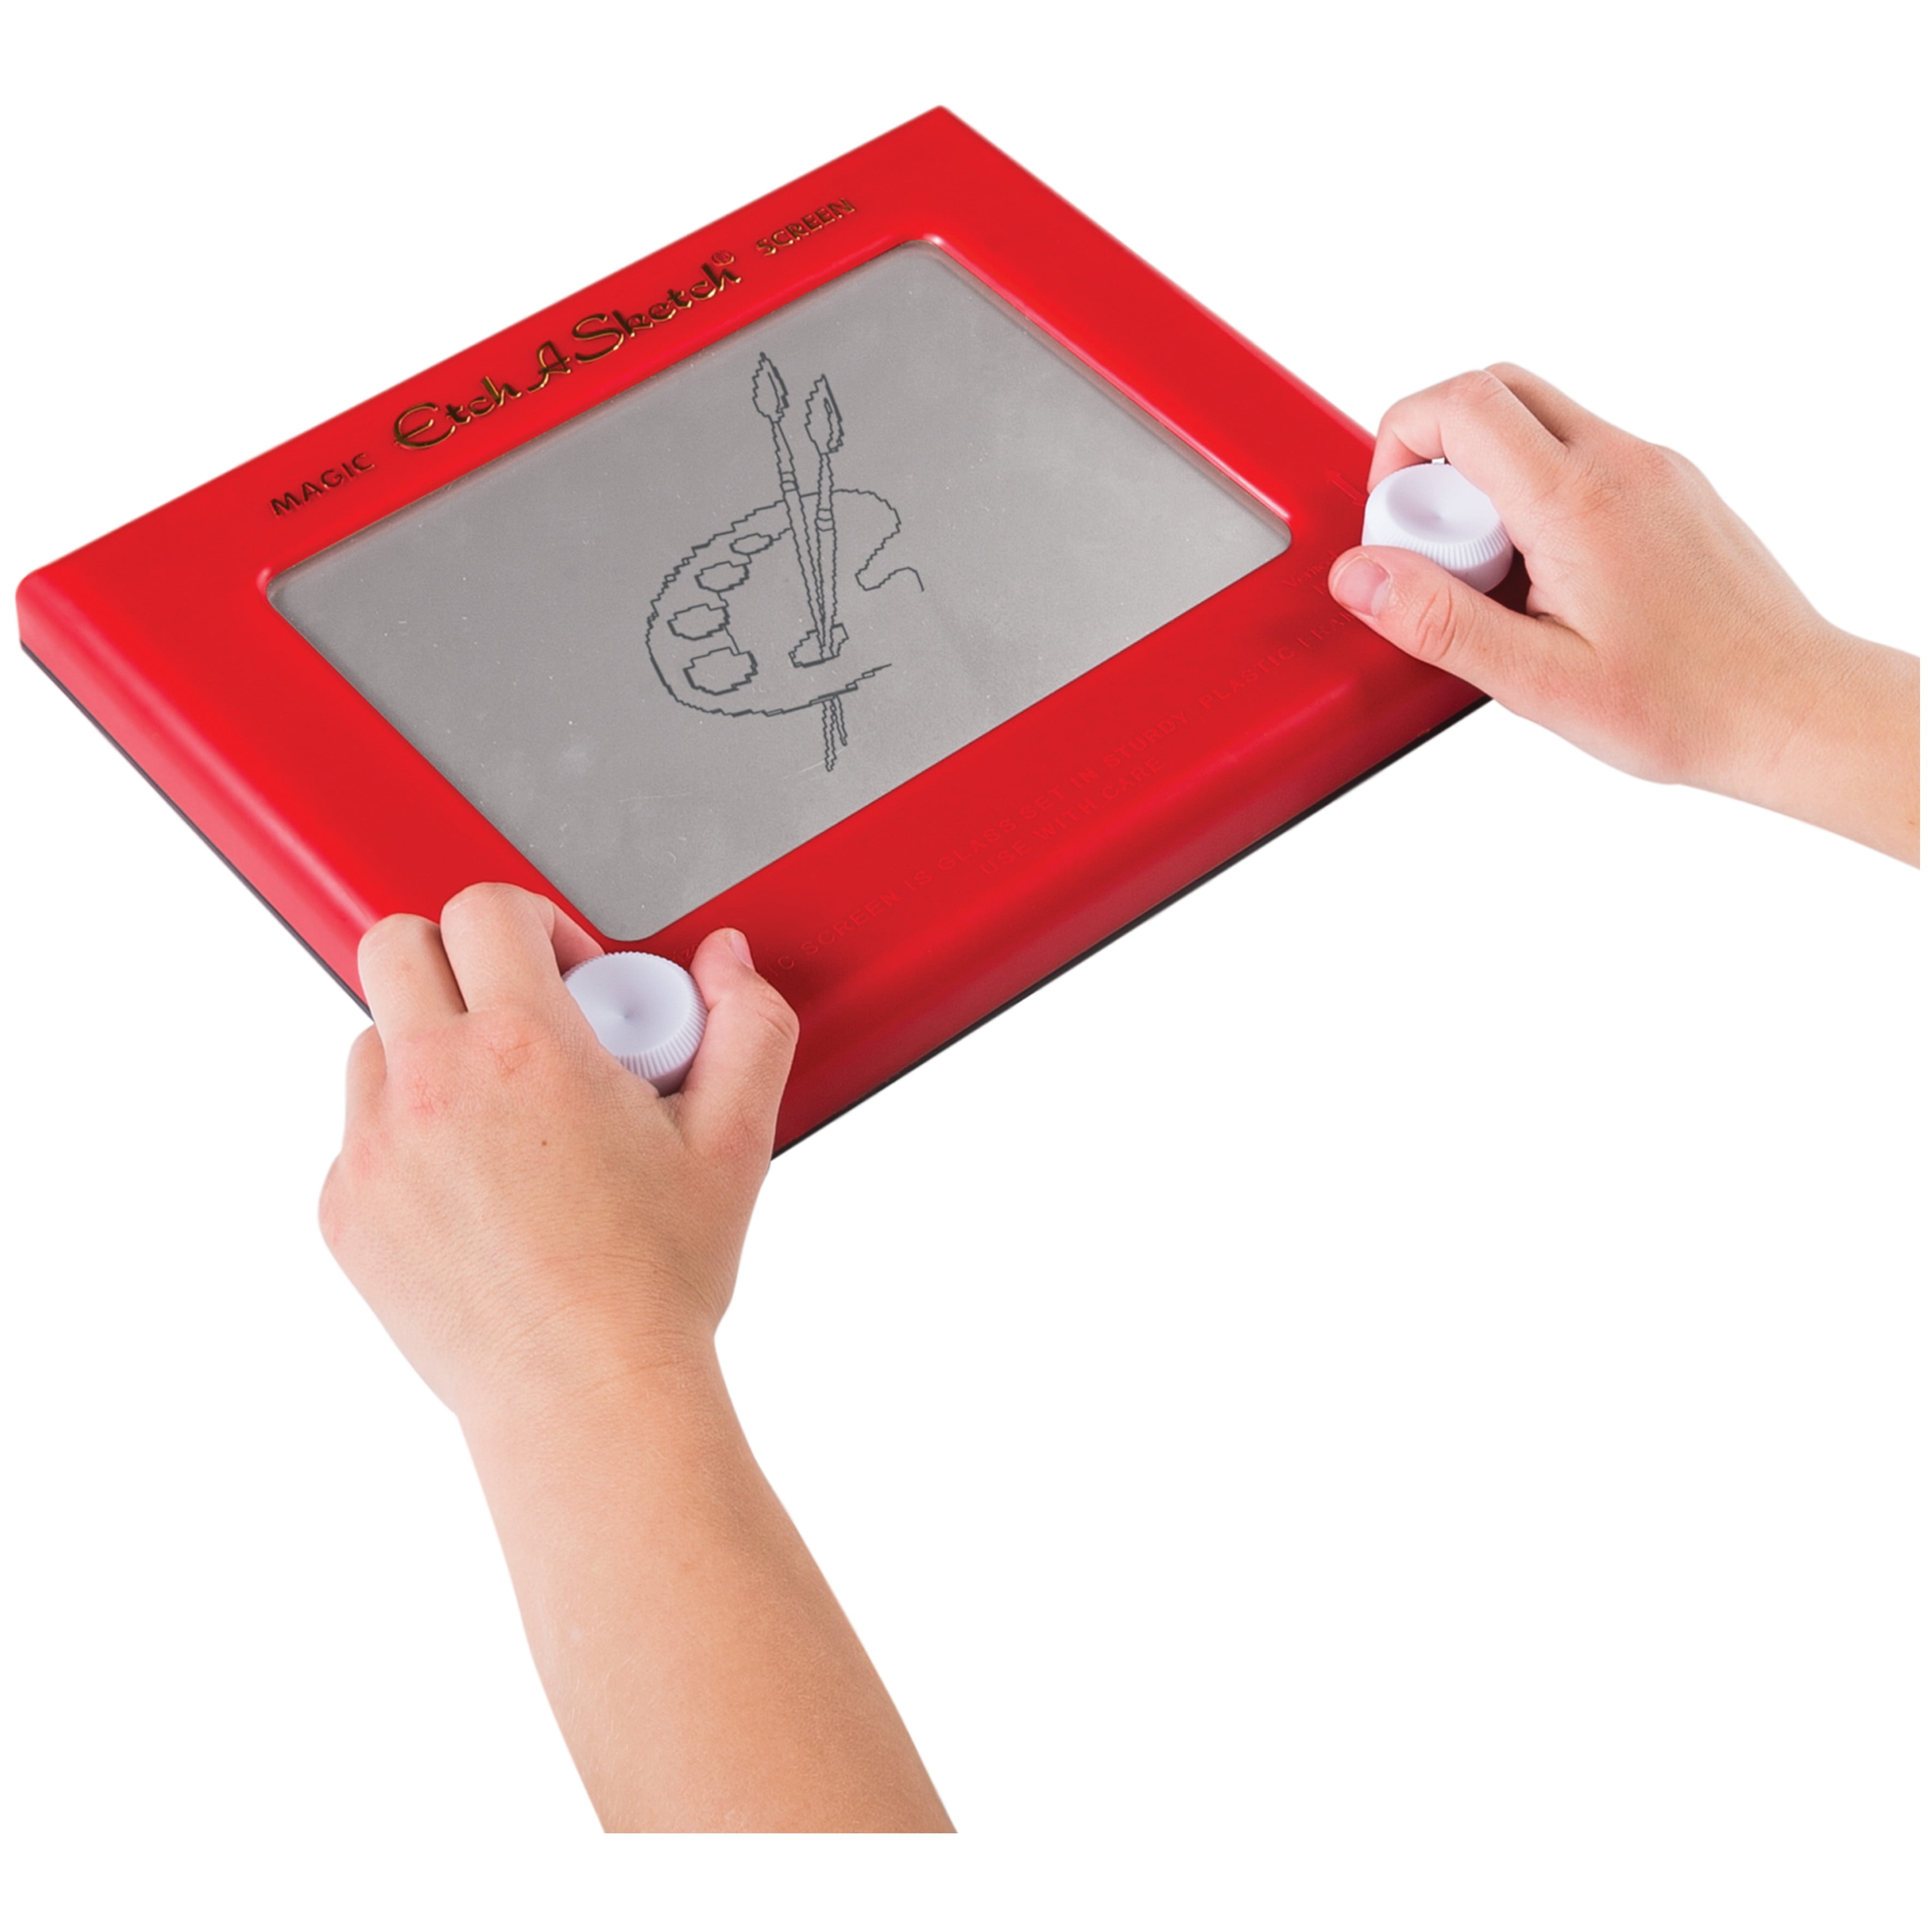 Etch A Sketch, Original Magic Screen, 86% Recycled Plastic,  Sustainably-Minded Classic Kids Creativity Toys for Boys & Girls Ages 3+